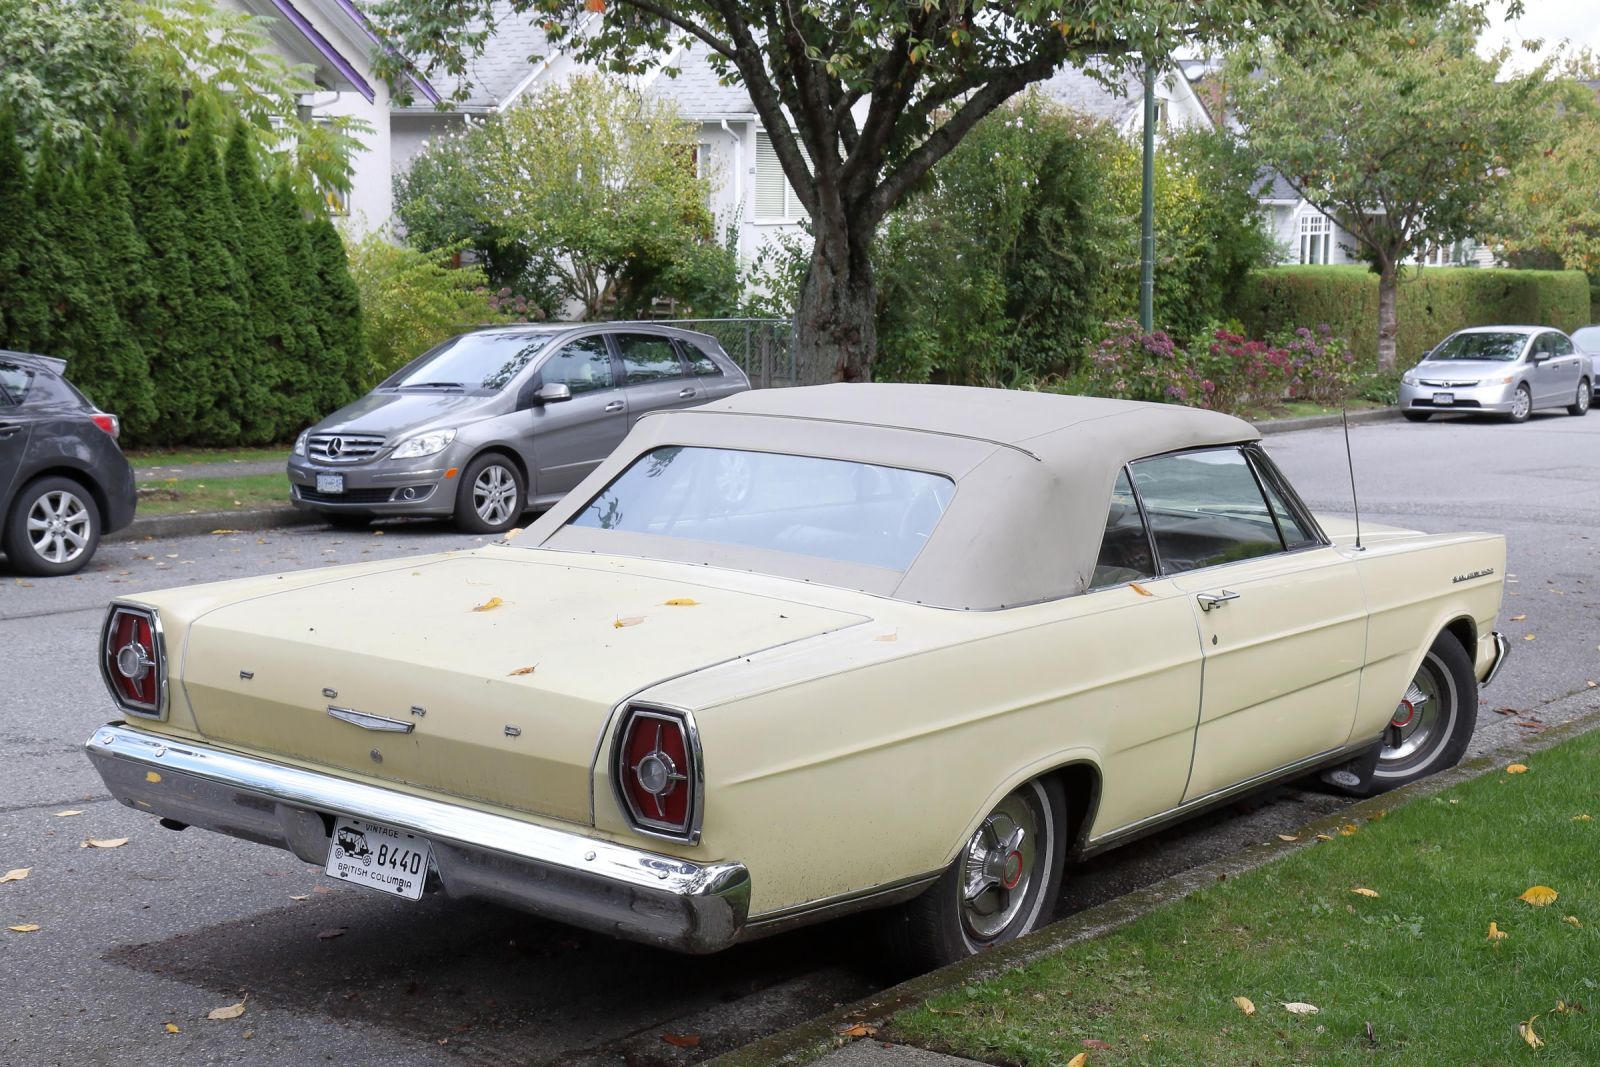 Ford Galaxie 500 on Vintage Plate